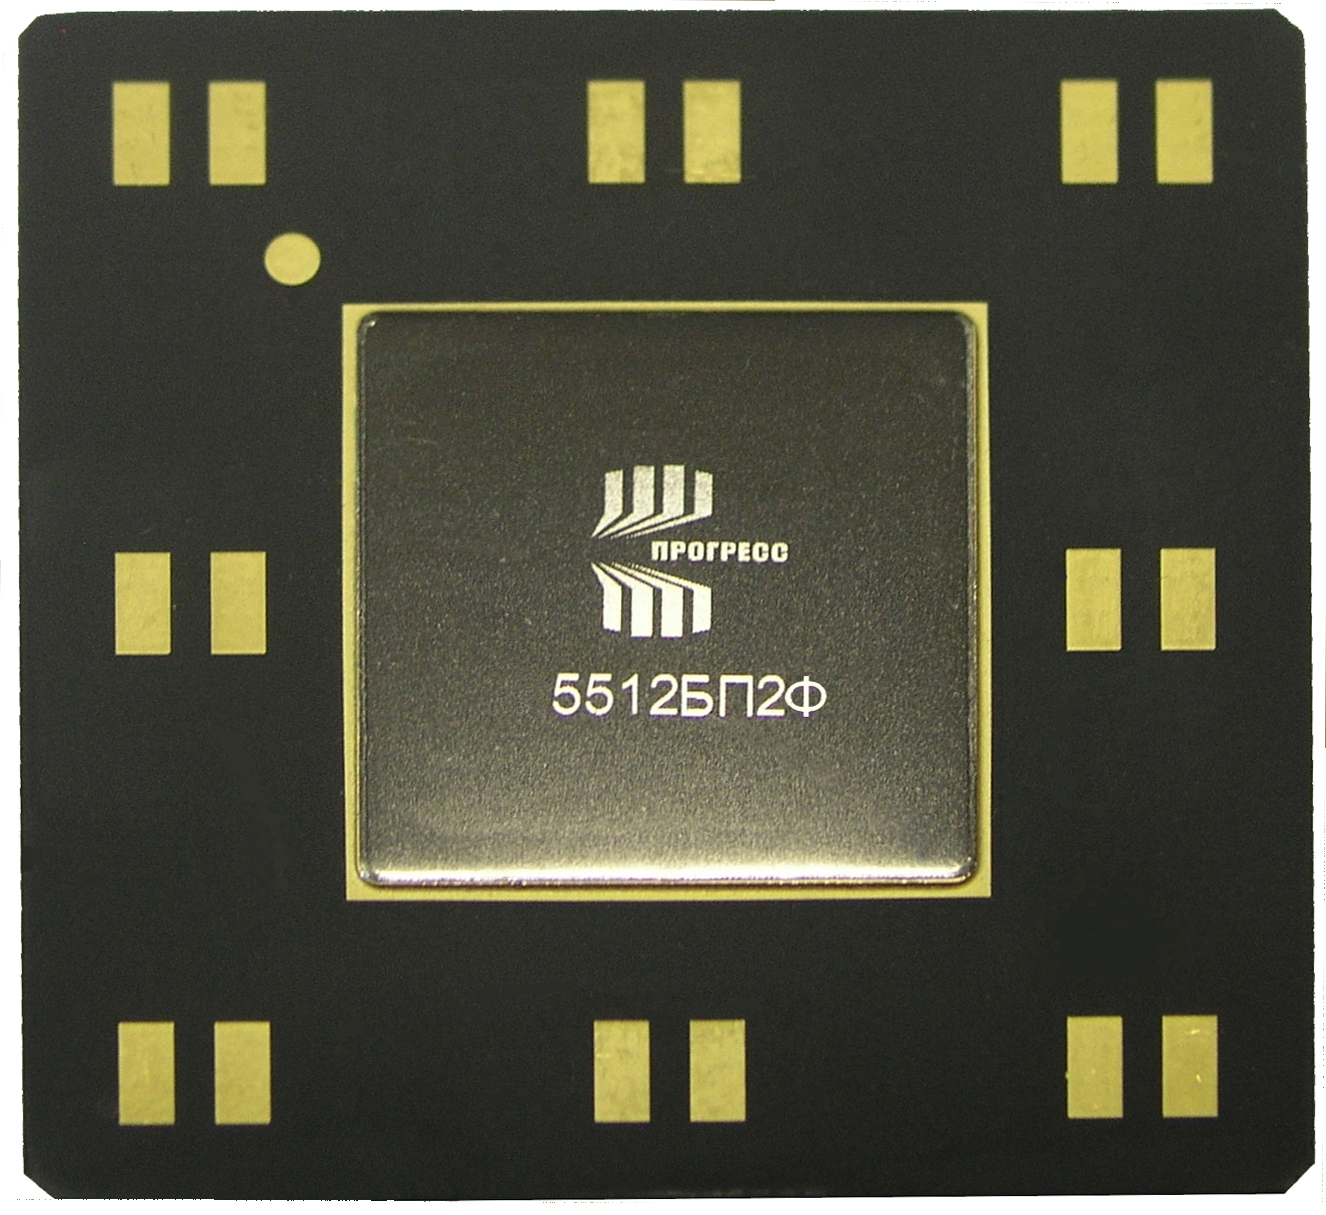 Radiation-resistant semi-ordered VLSI of CNC 5512BP2F with integrated MP core